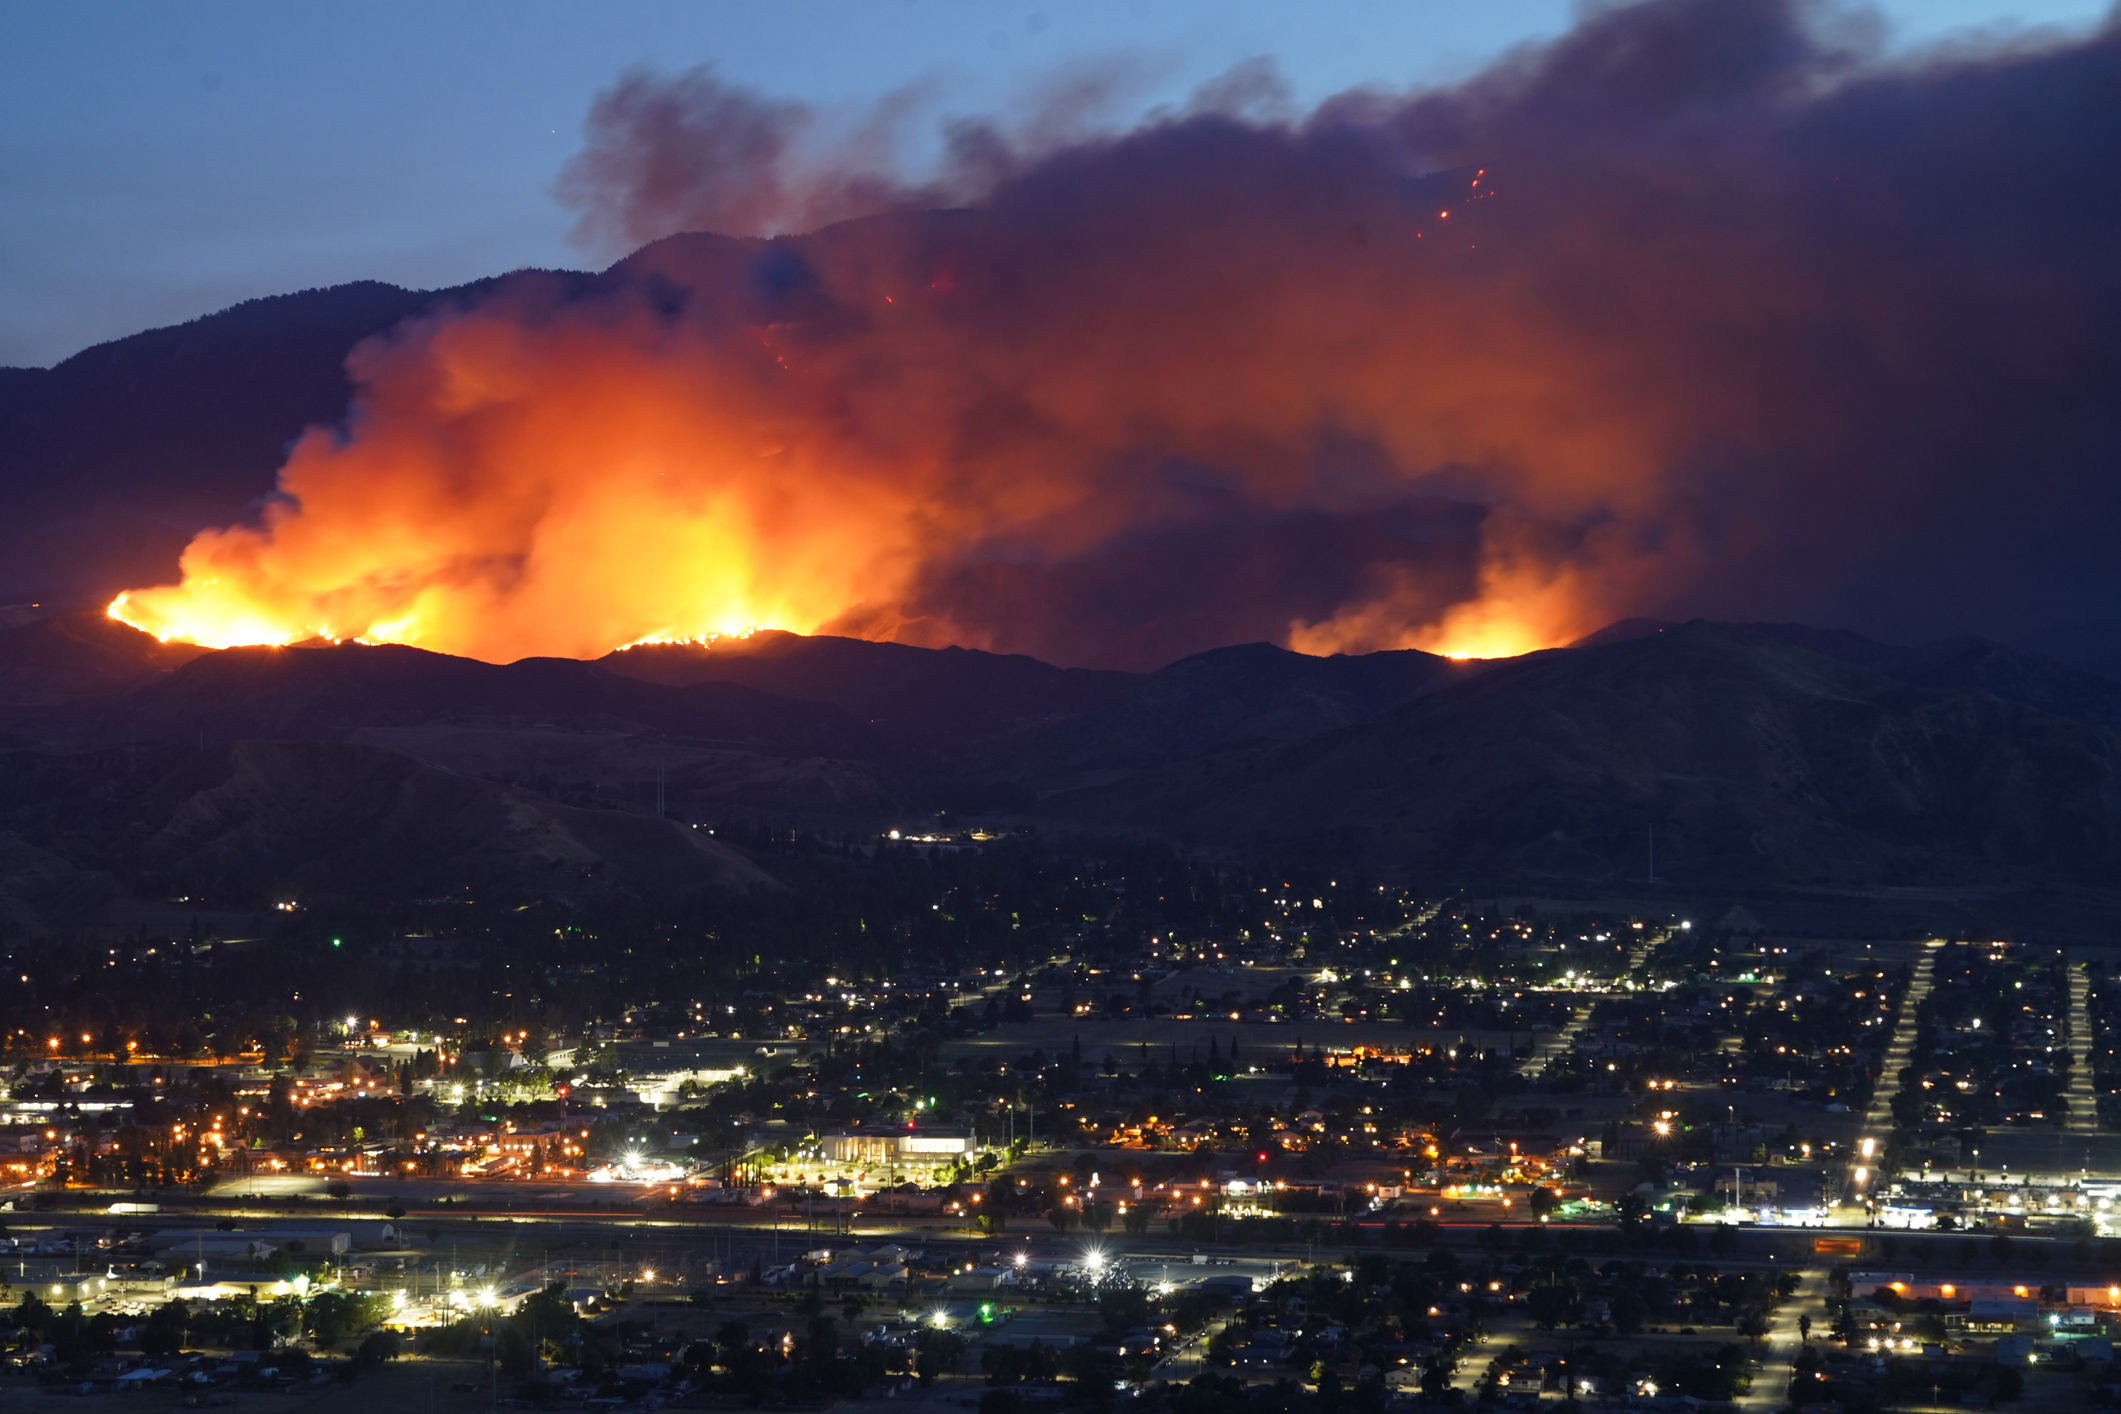 A large wildfire burns in the mountains above a California city.